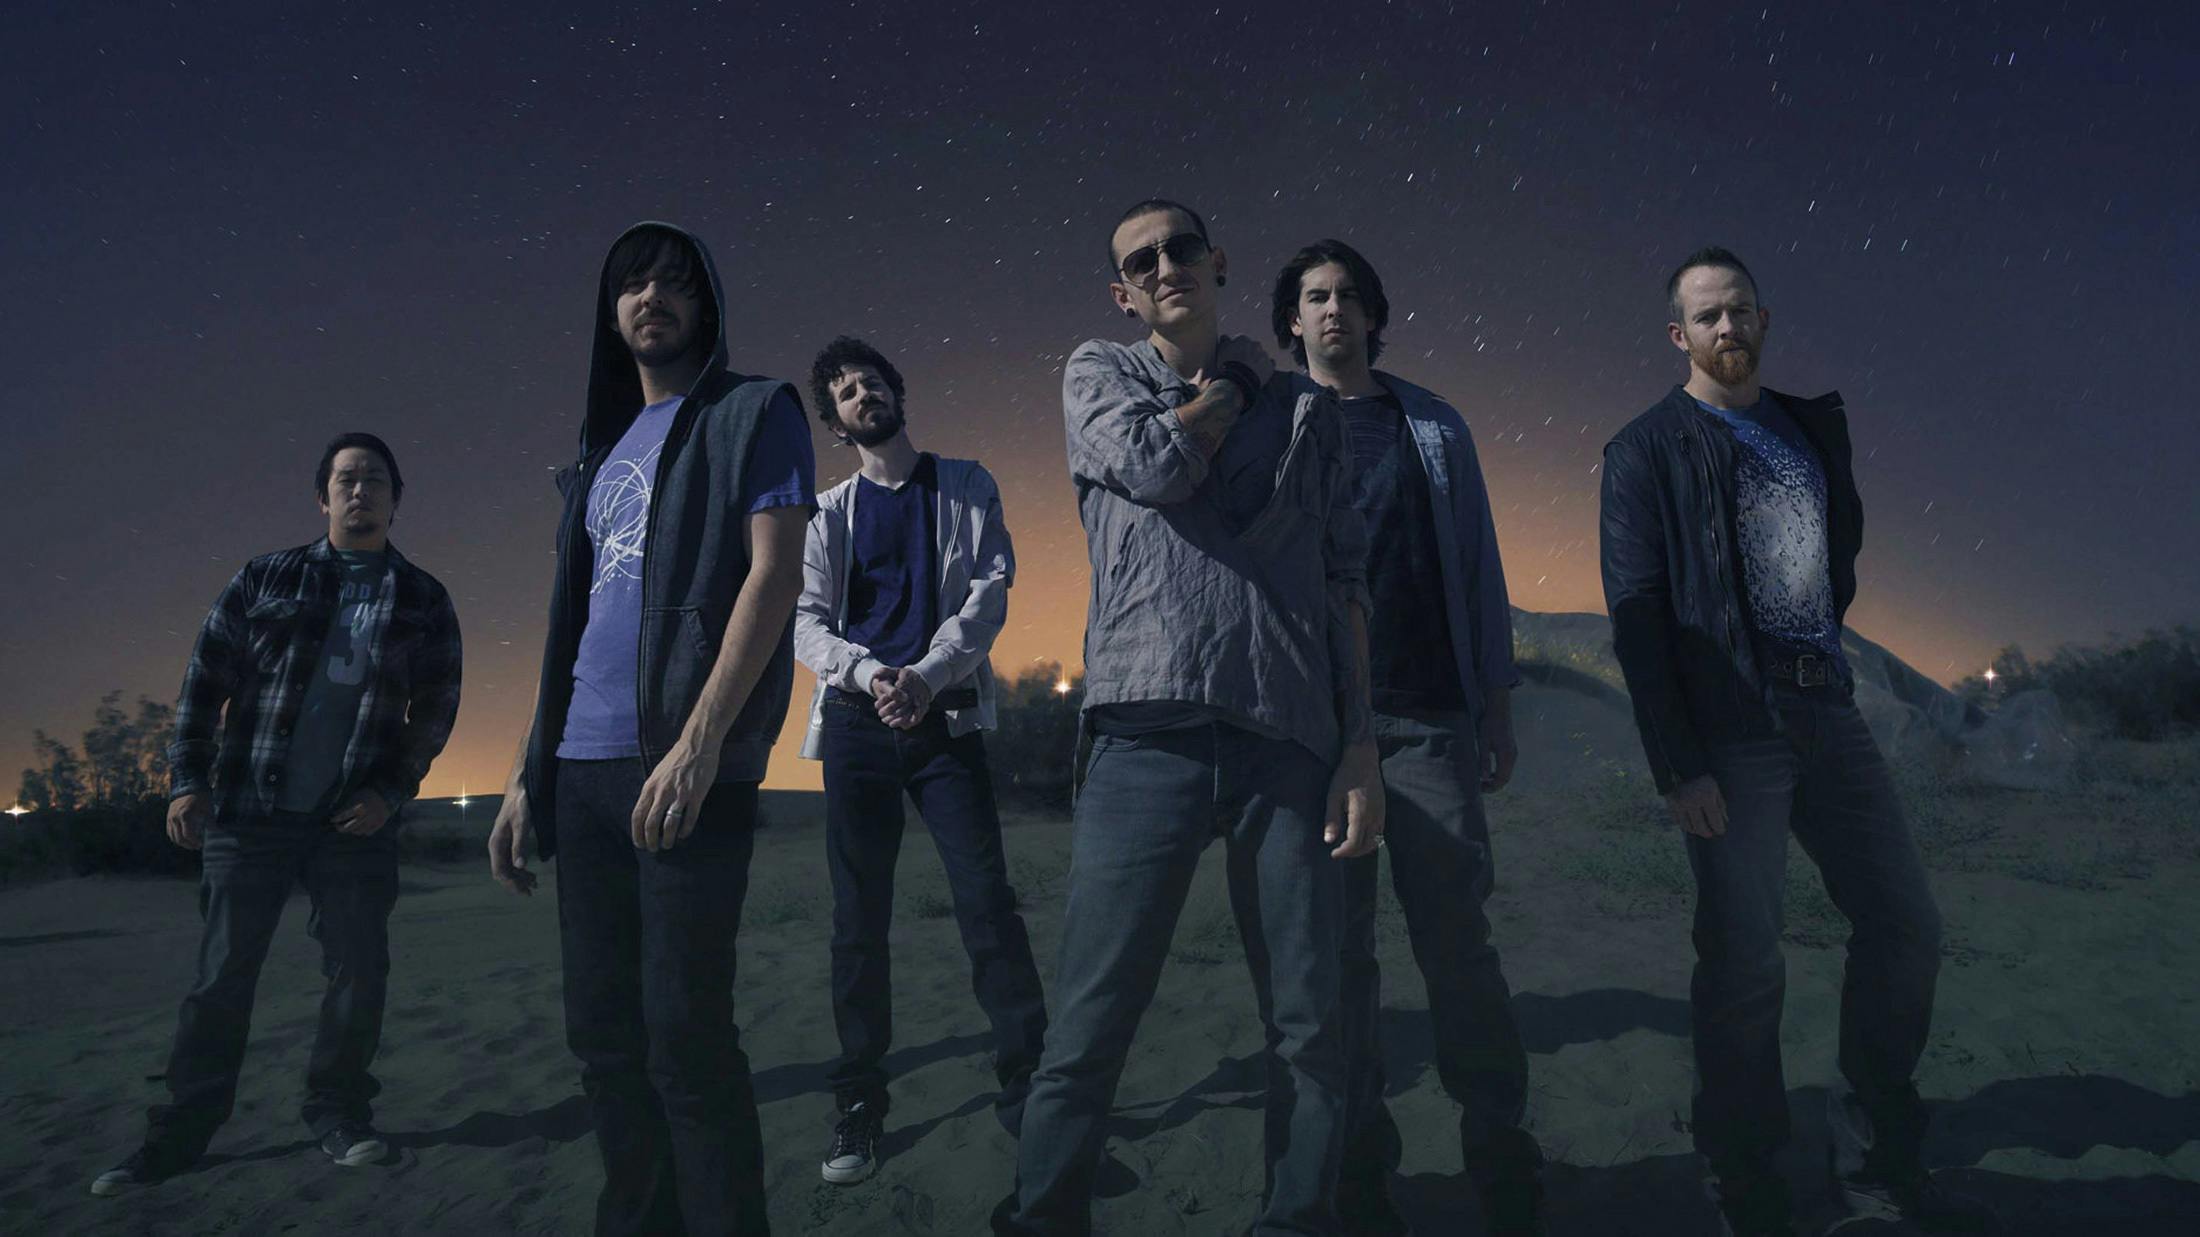 Linkin Park’s A Thousand Suns changed the way we think about concept albums